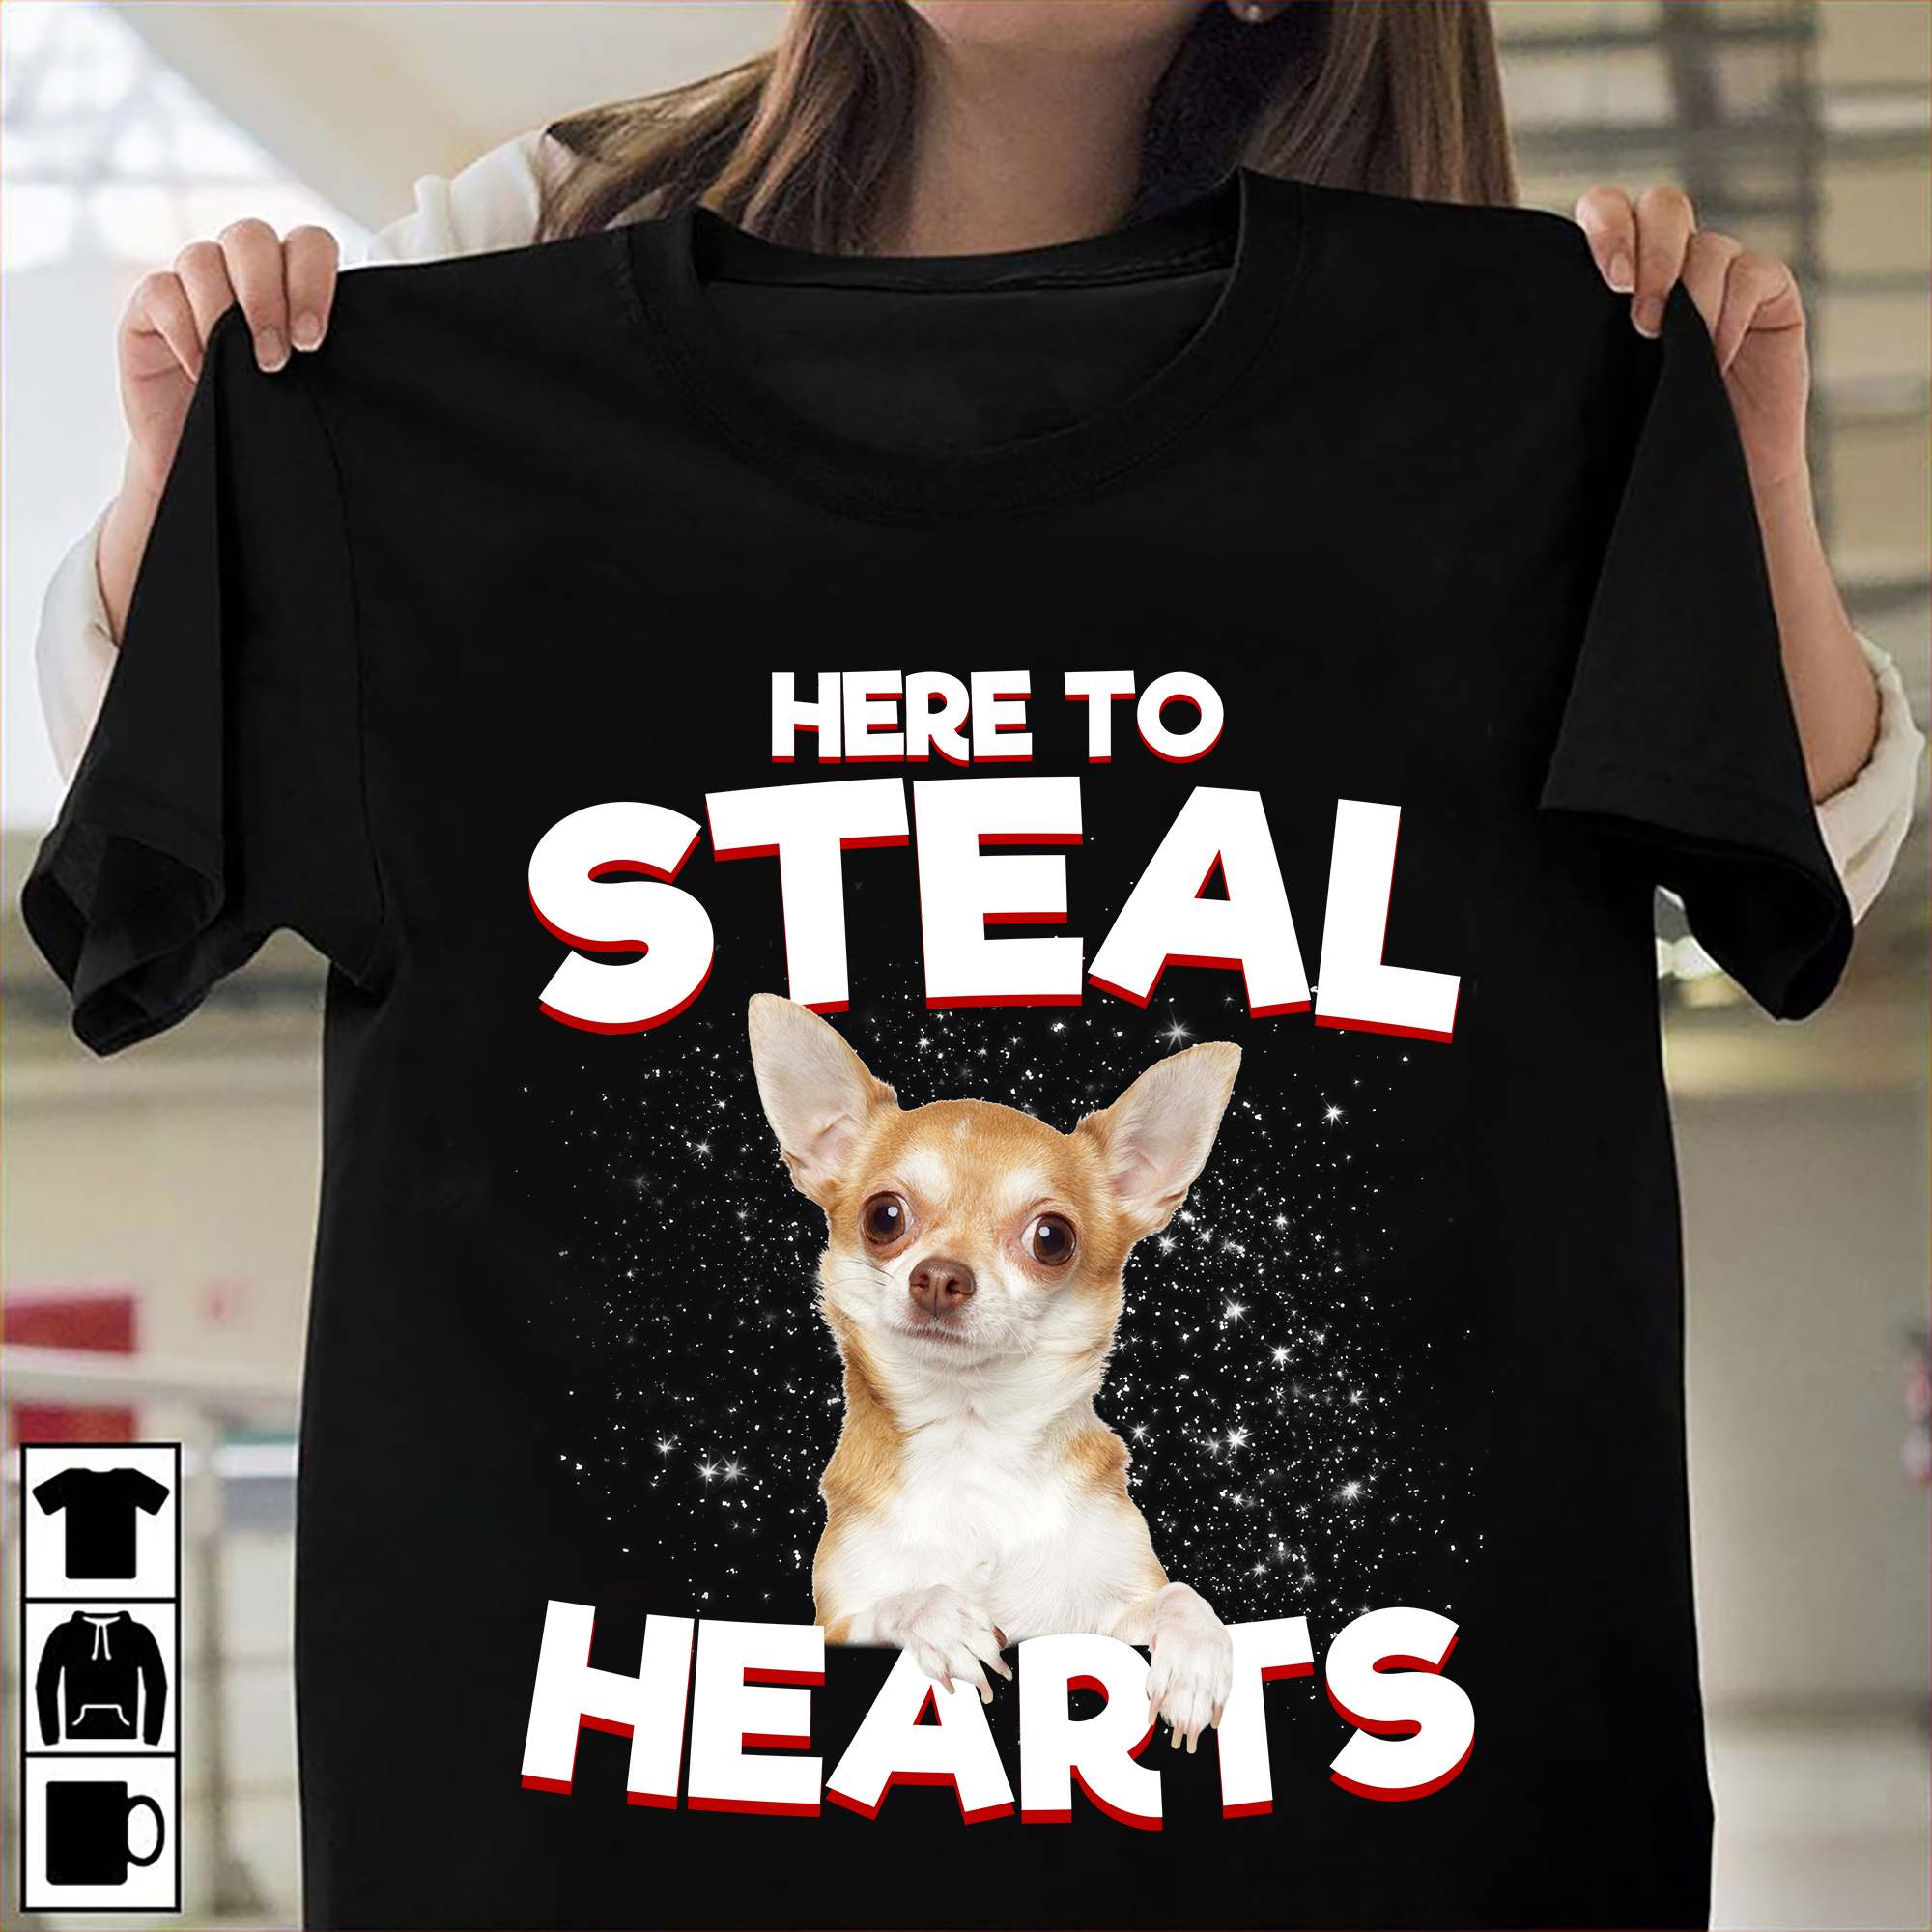 Here to steal hearts - Chihuahua dog, dog lover